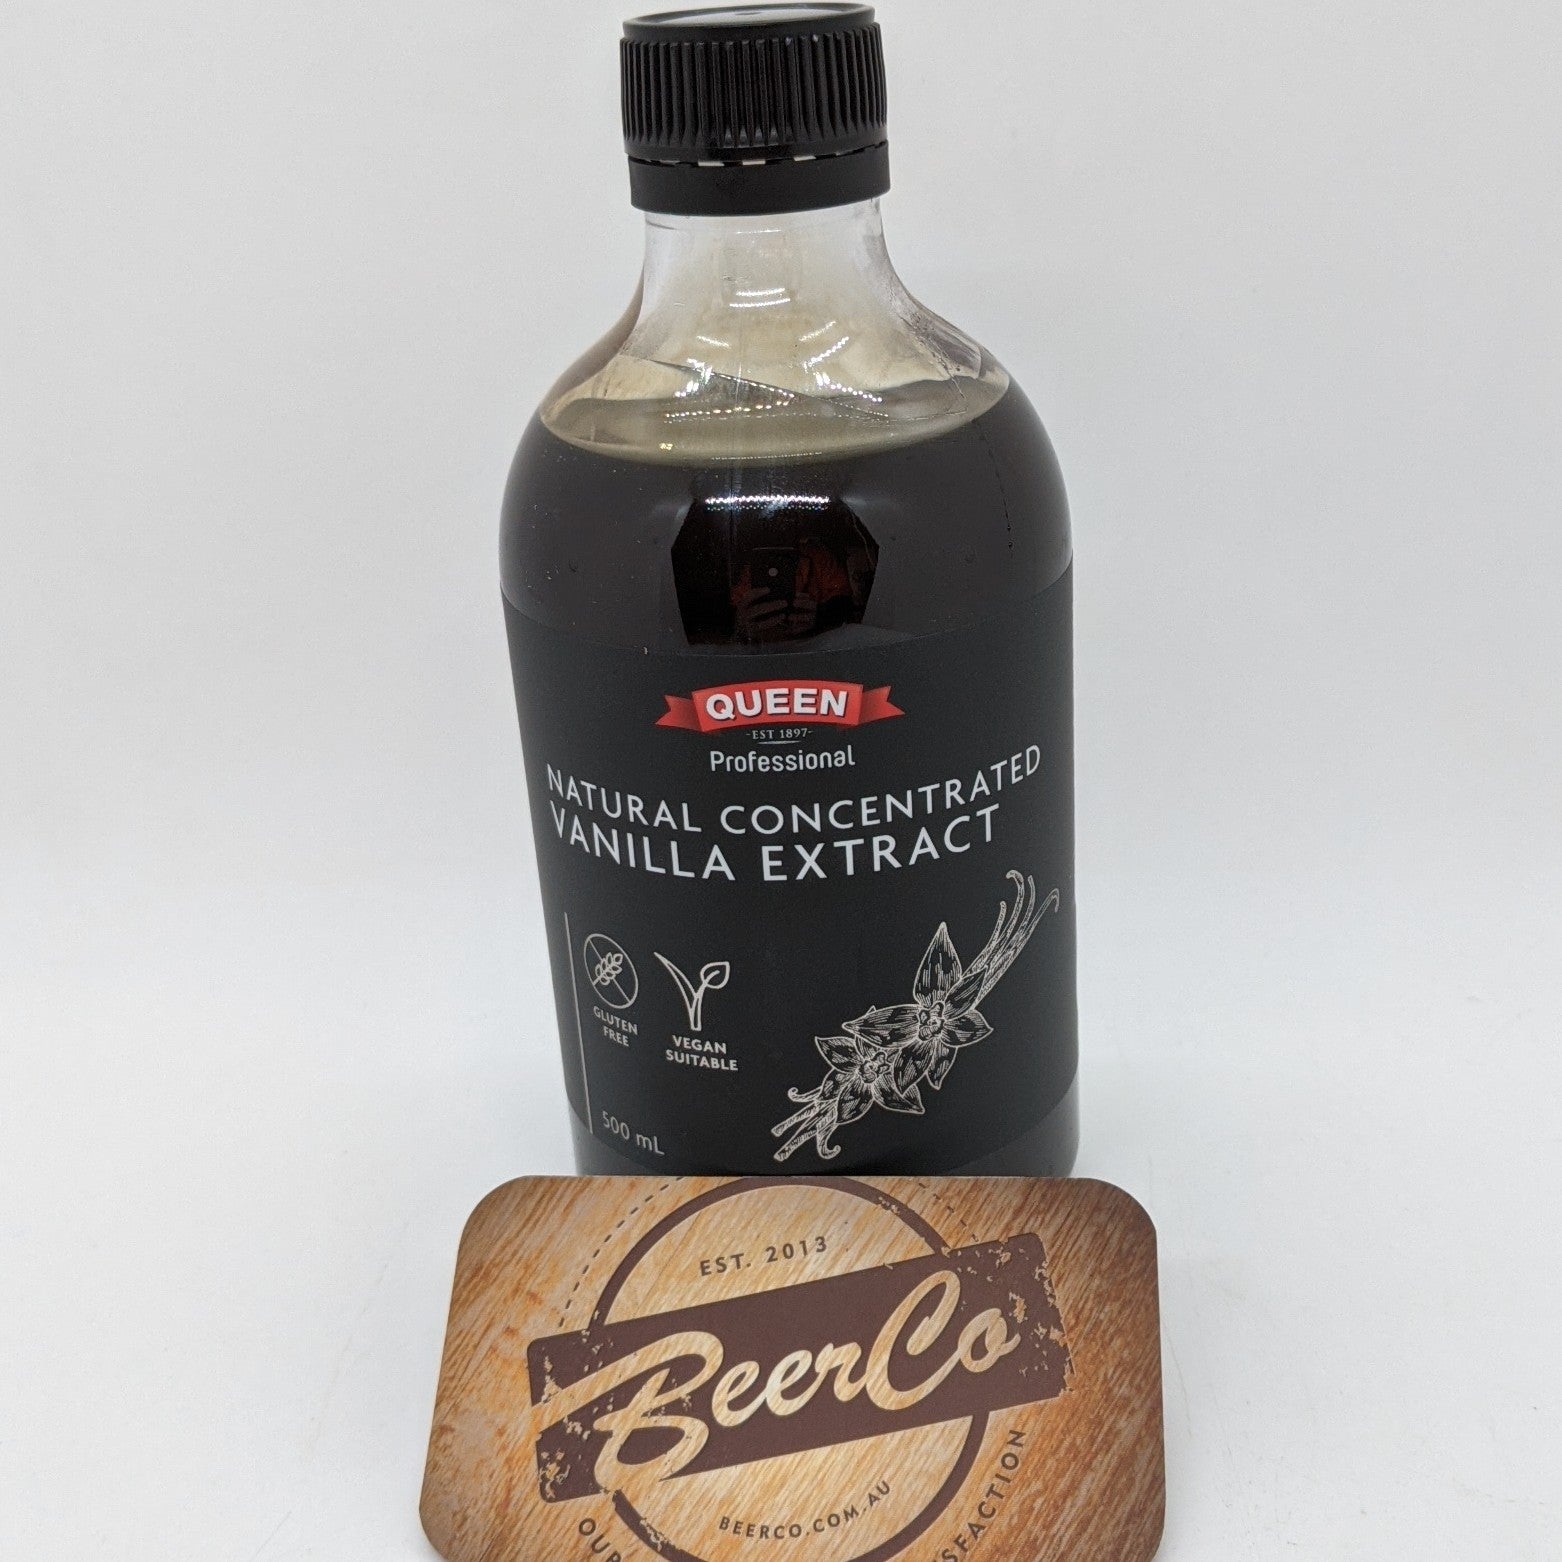 Queen Natural Vanilla Concentrated Extract